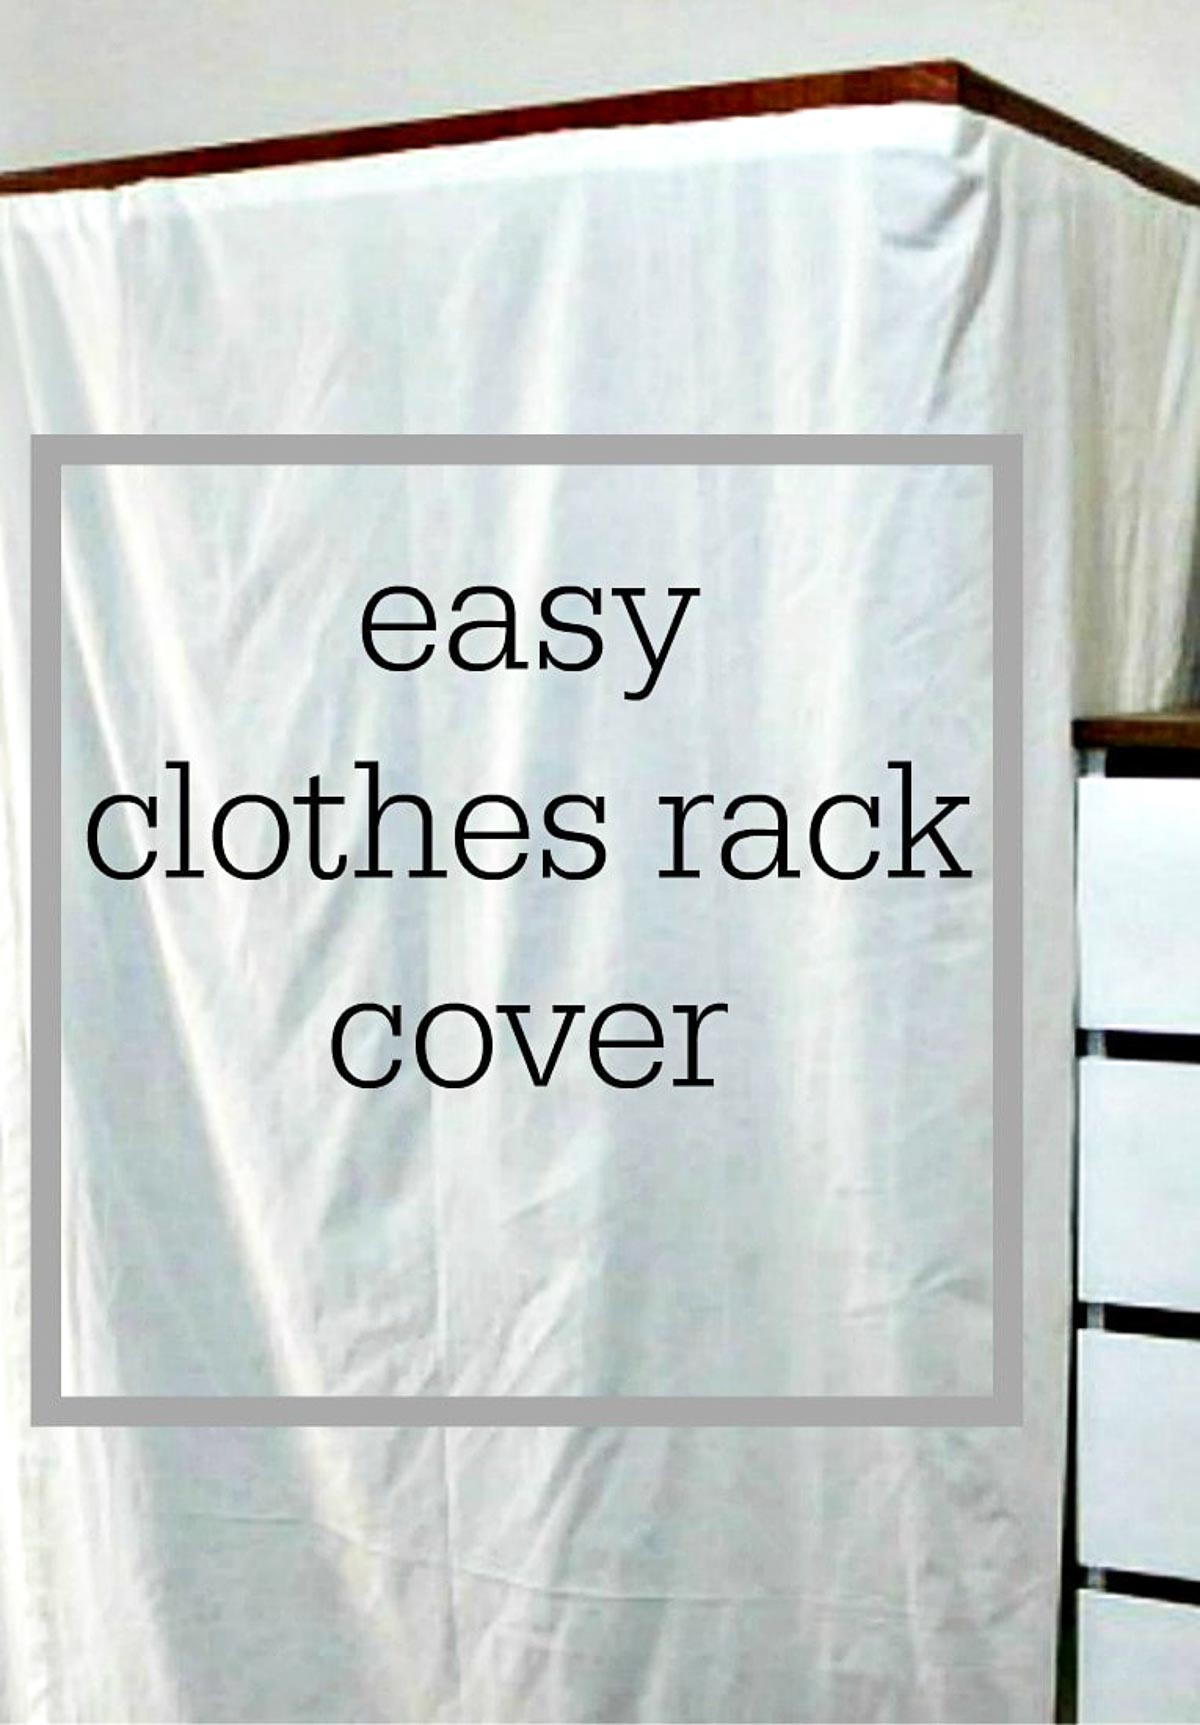 Clothes rack cover with overlay that says "easy clothes rack cover."